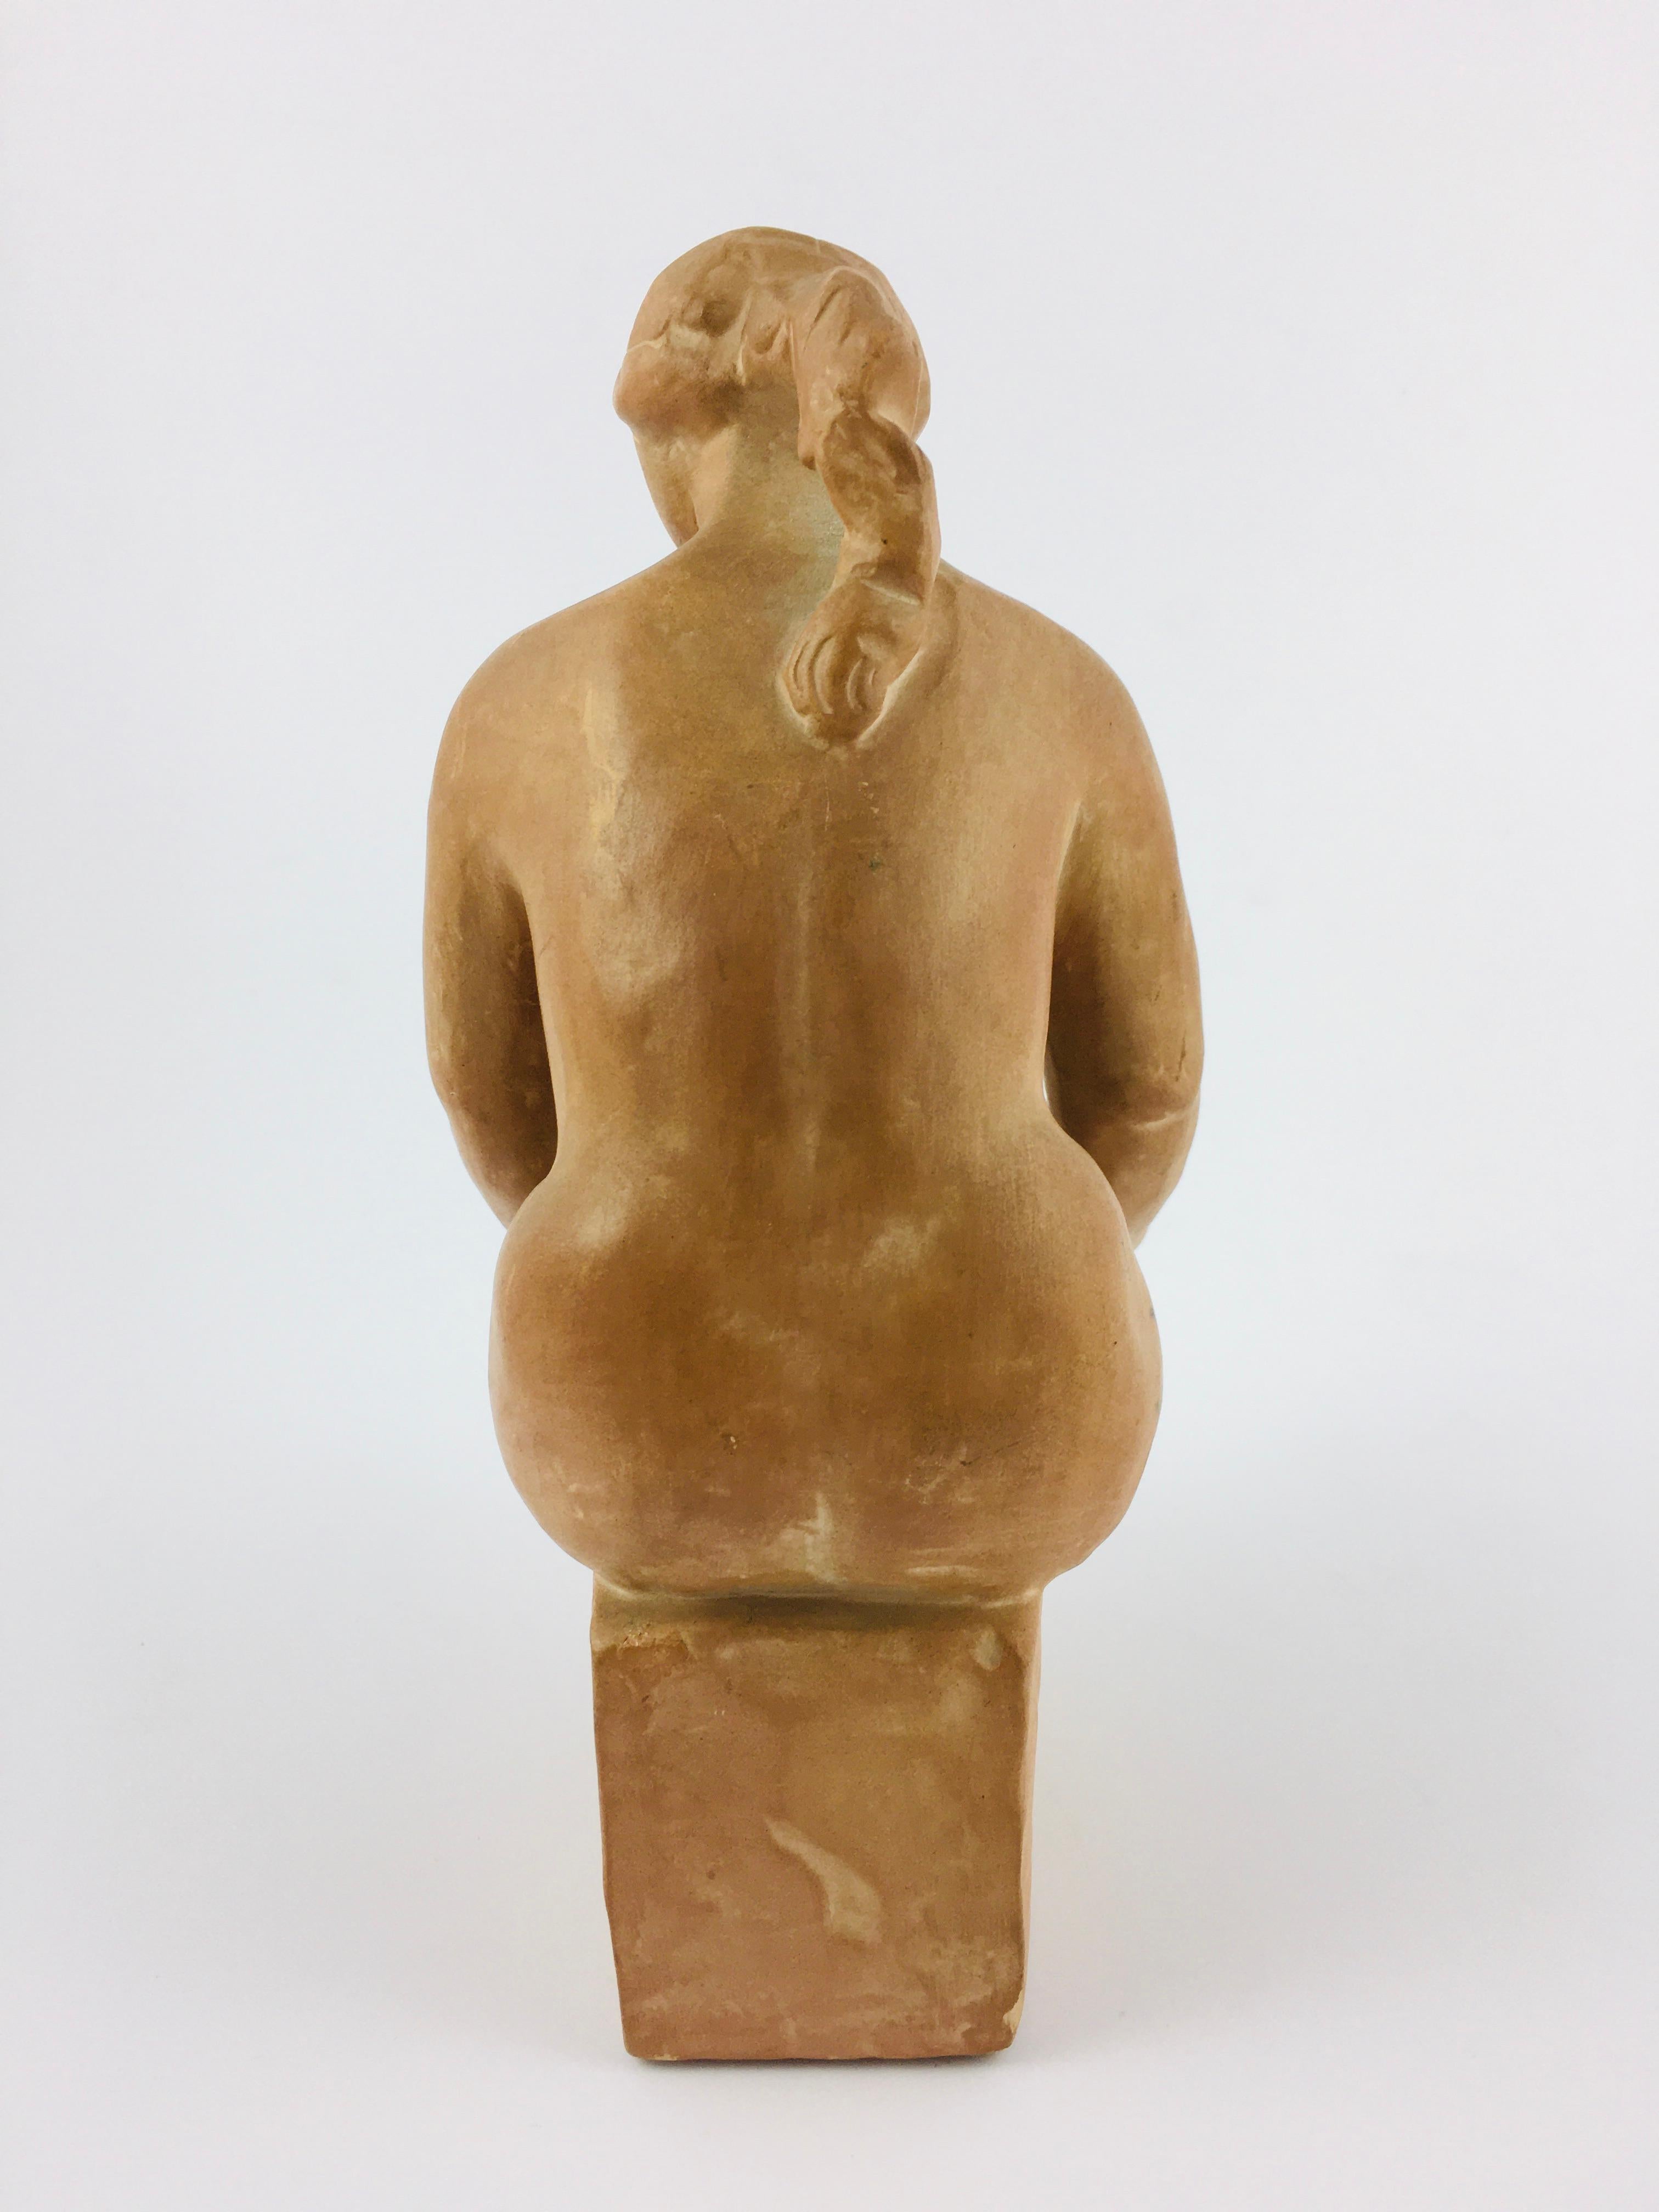 Hungarian  Terracotta Sculpture Female Nude Figure by Árpád Somogyi, Hungary 1970's For Sale